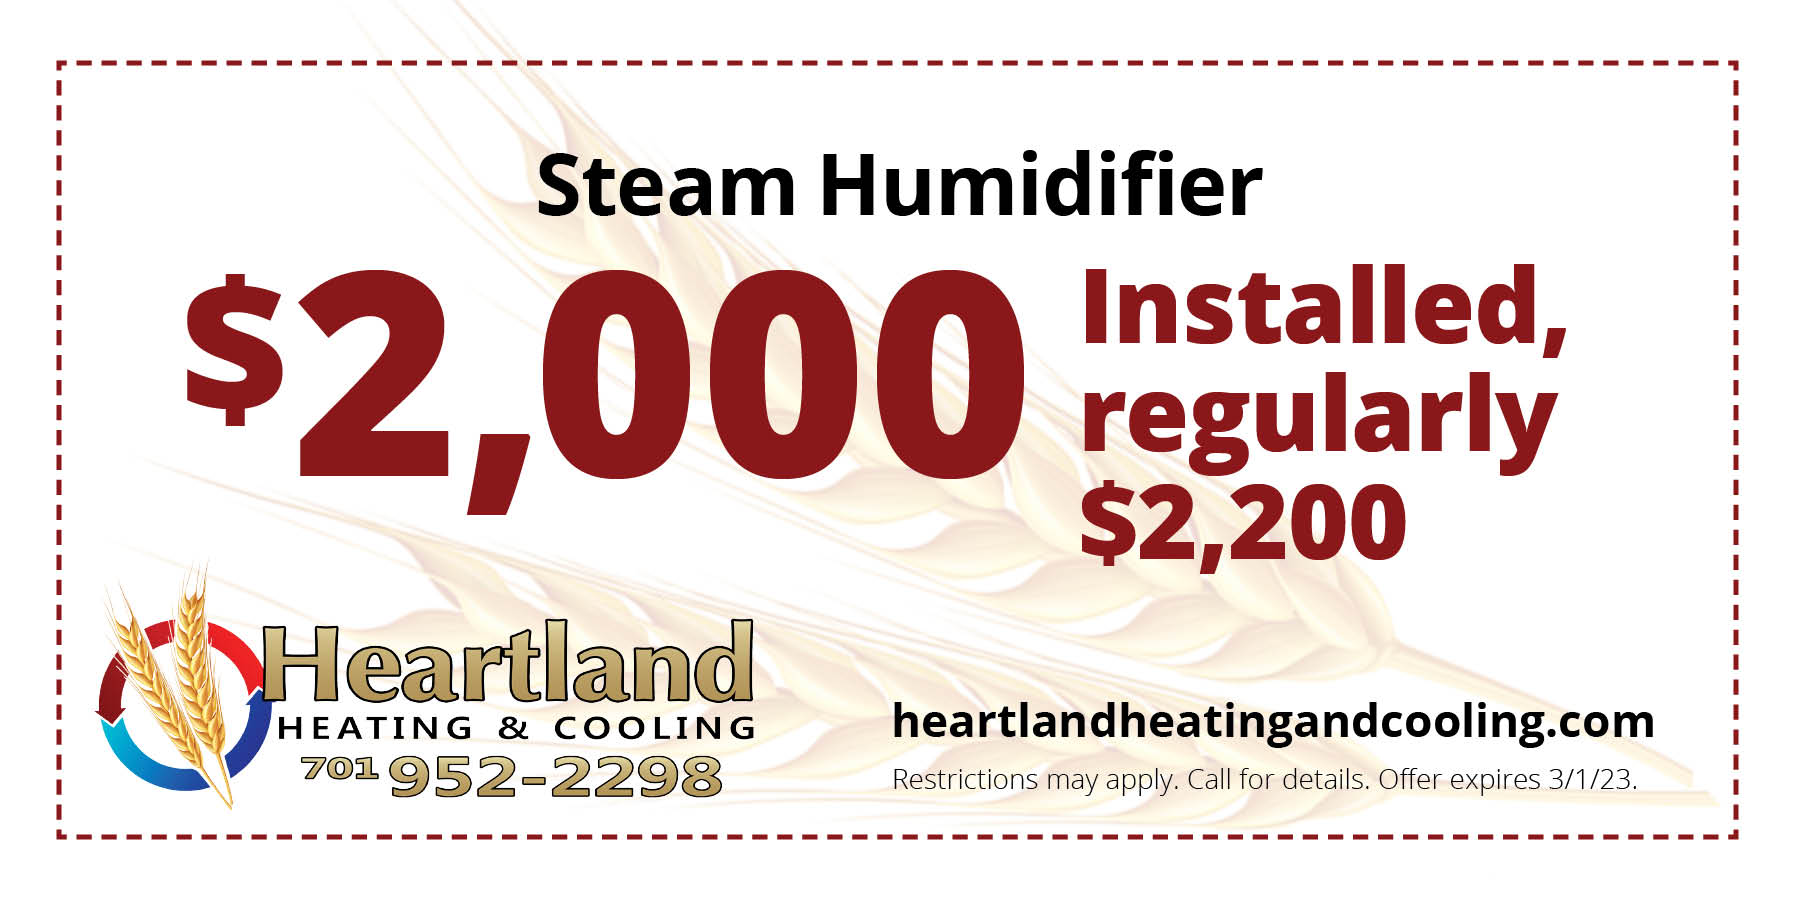 00 off Steam Humidifier